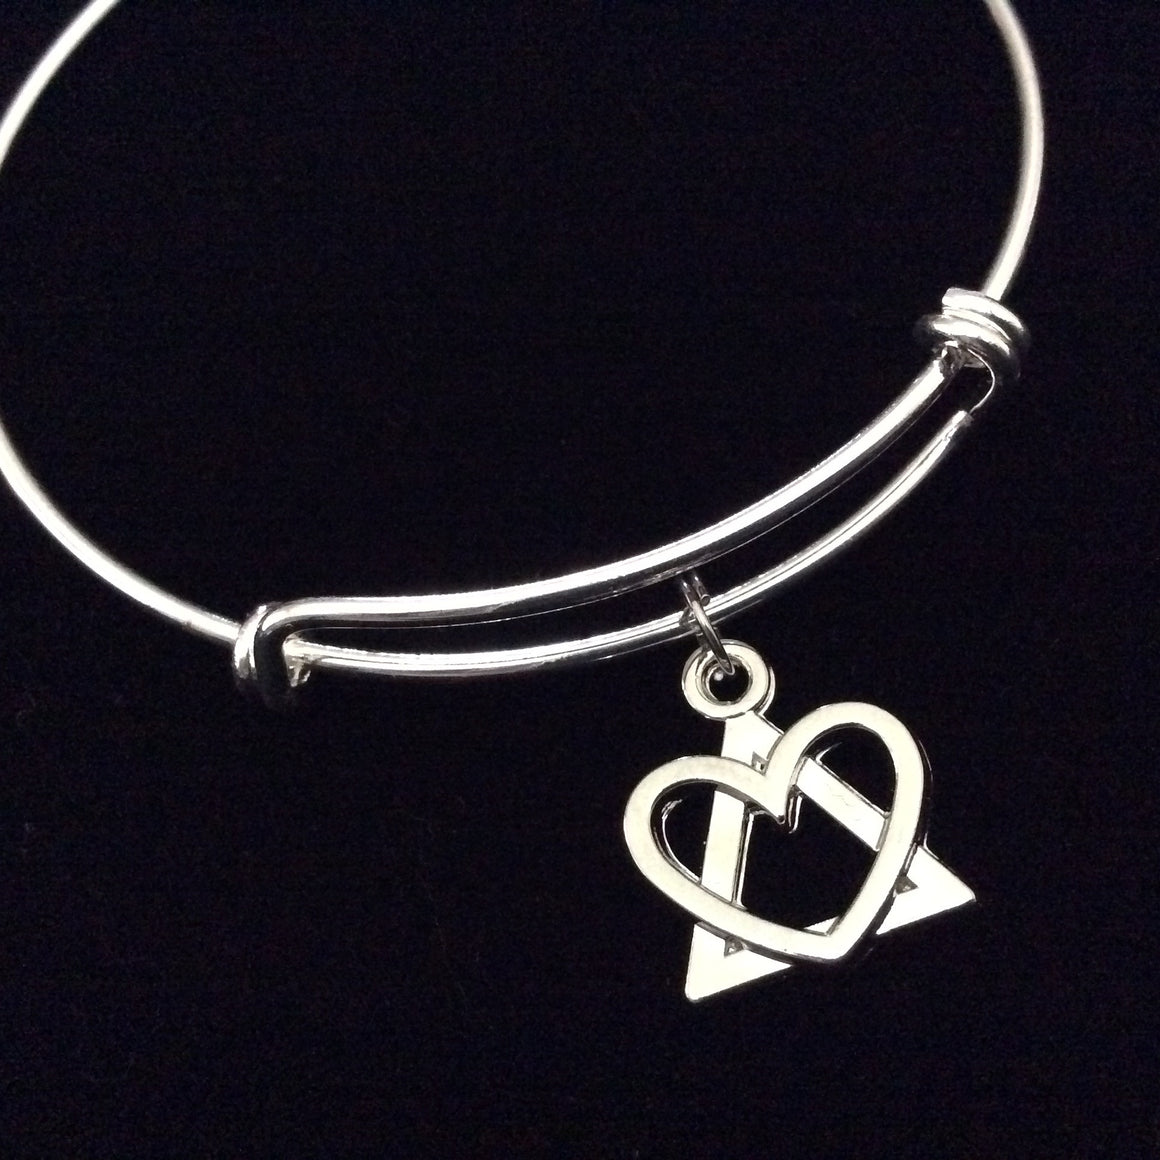 Triangle and Heart Expandable Silver Charm Bracelet Adjustable Wire Bangle Adoption Symbol